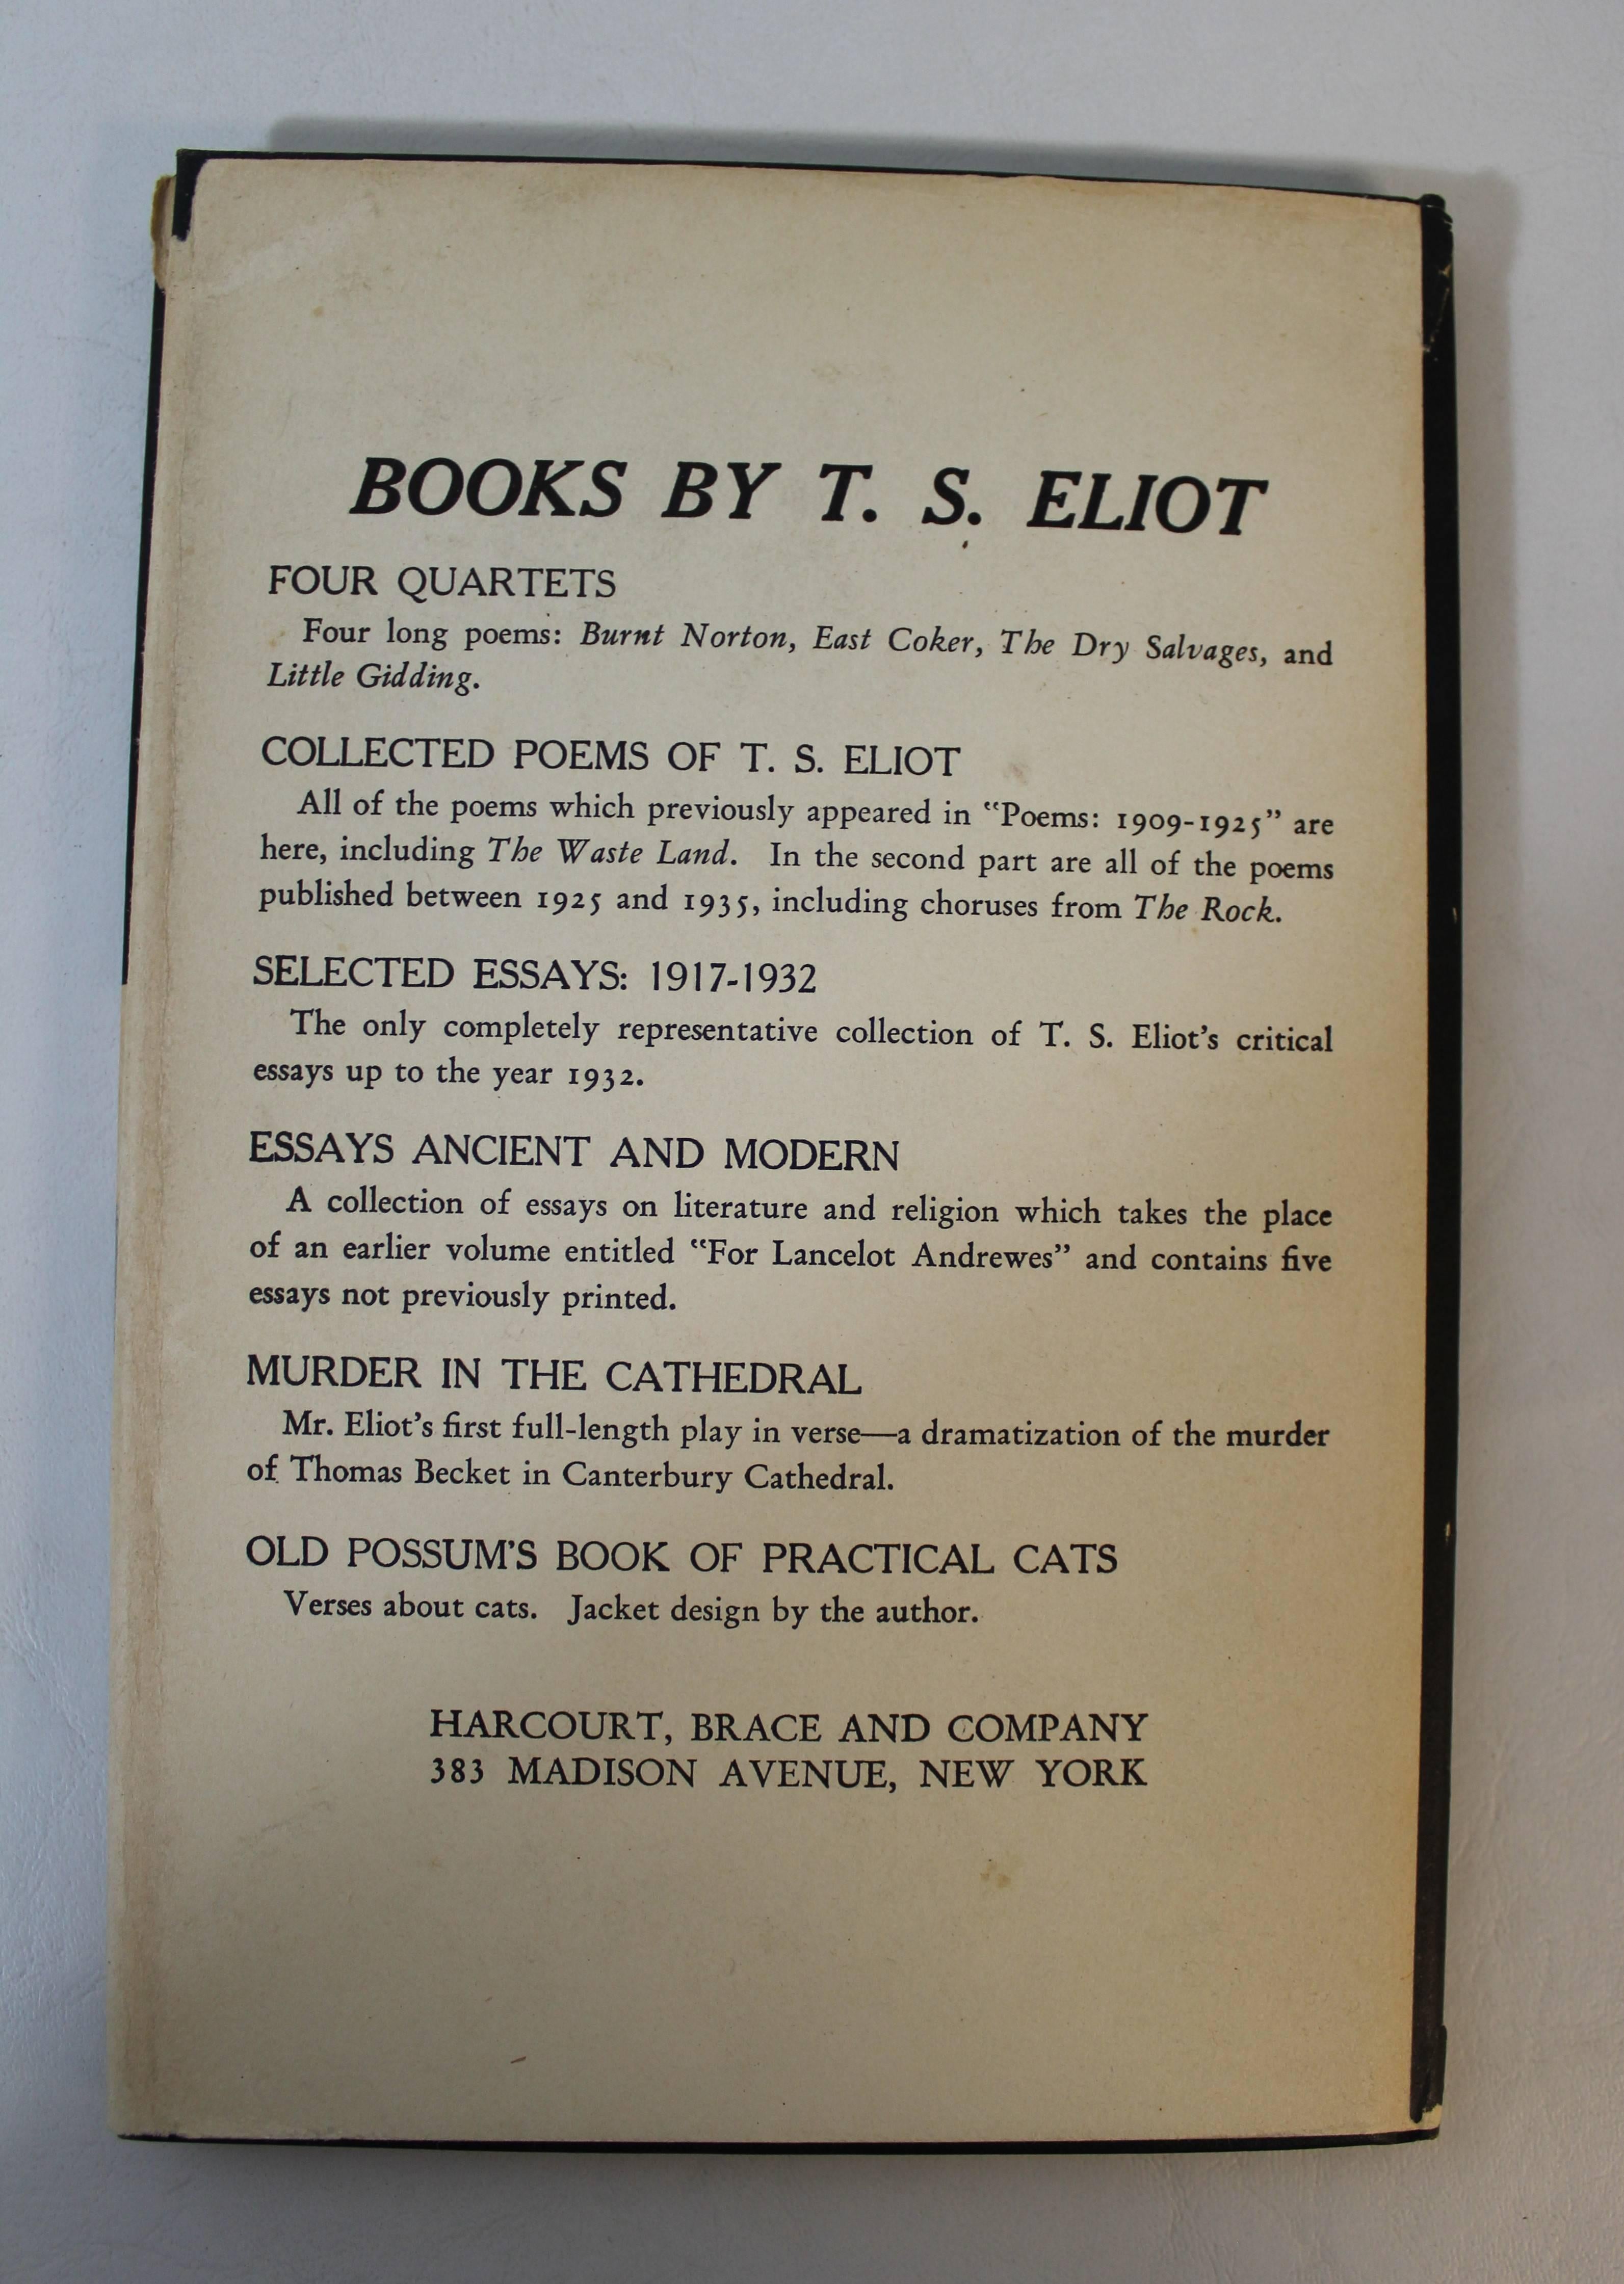 American 'Four Quartets' First Edition Book by T.S. Eliot For Sale